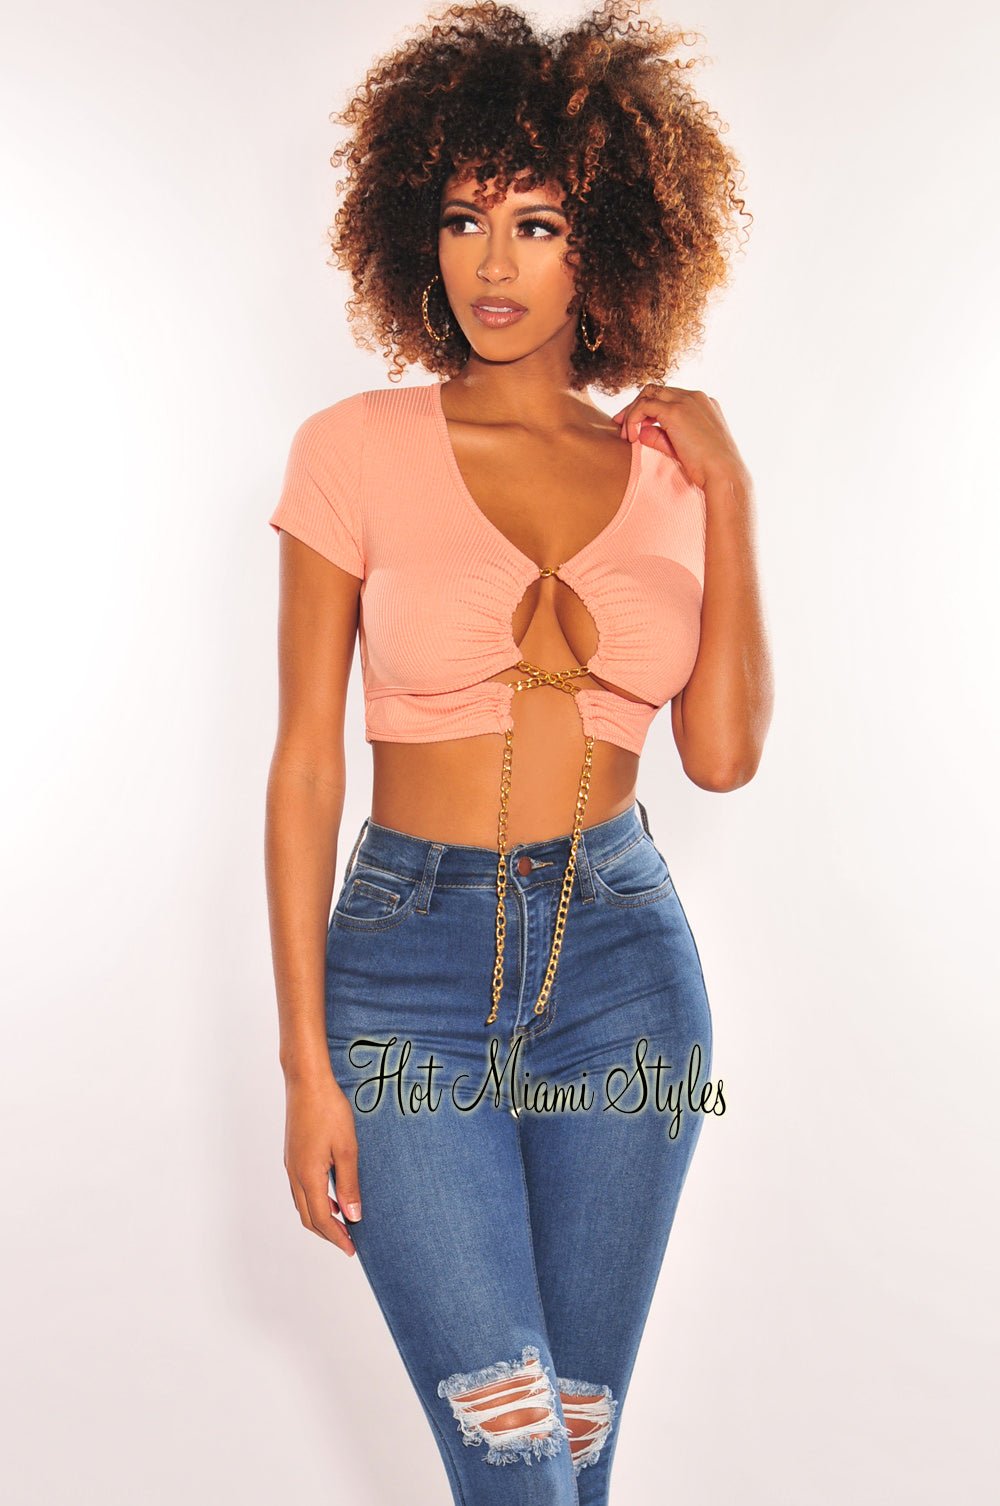 venlige facet Udveksle Peach Gold Chain Ribbed Lace Up Cut Out Crop Top - Hot Miami Styles